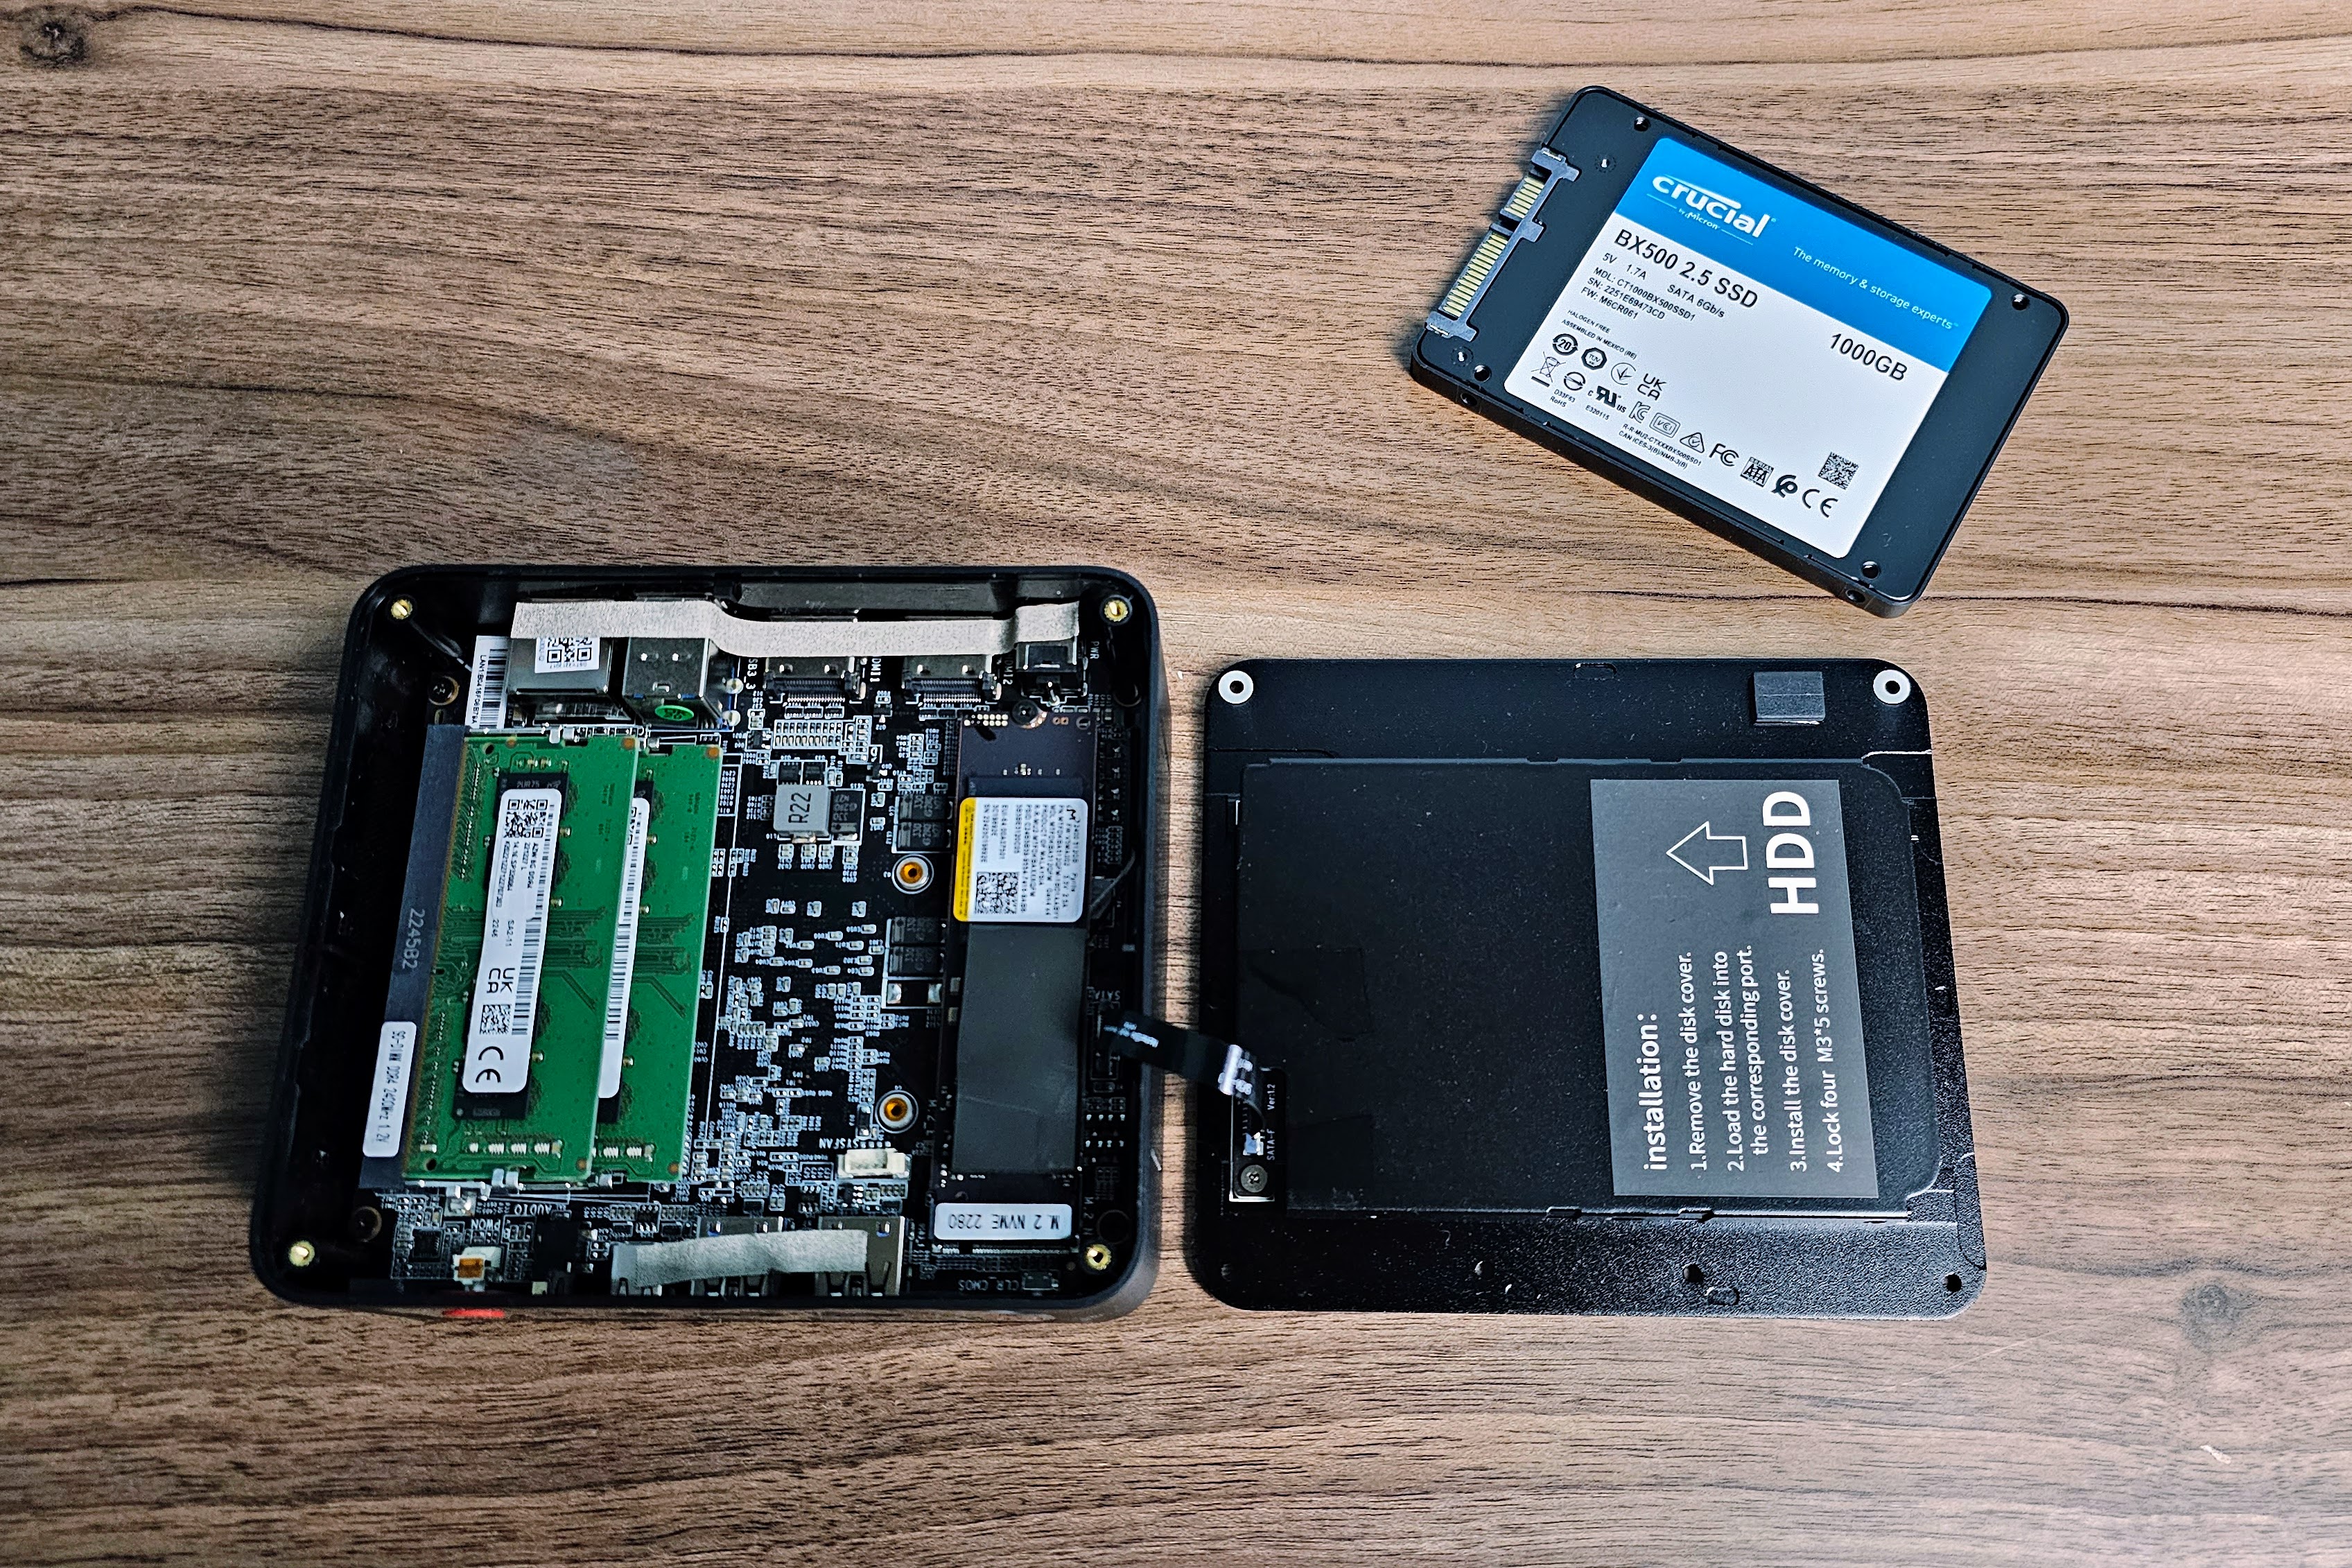 Beelink SER5 internals, with a slot for a 2.5-inch solid state drive.